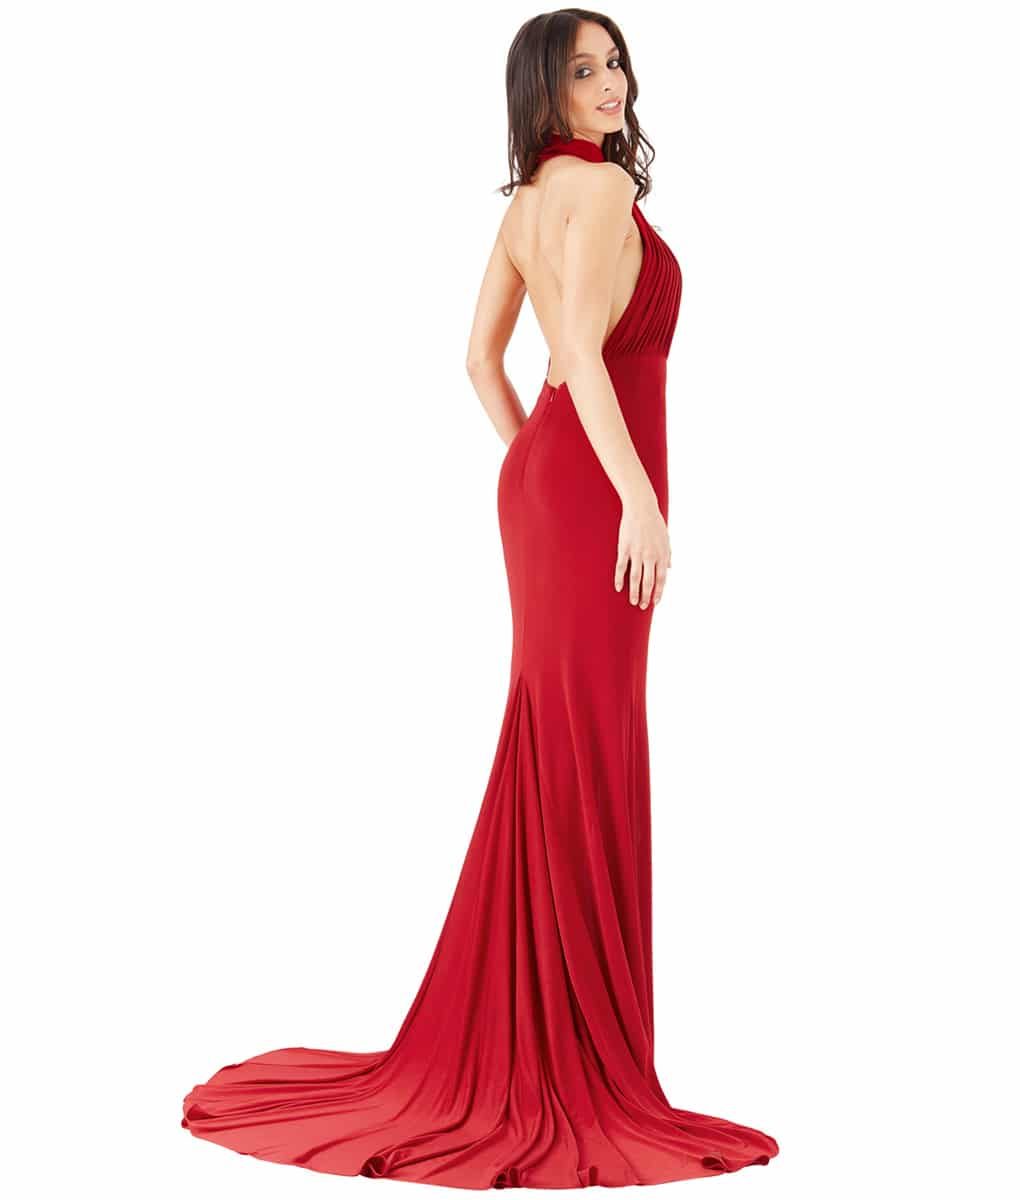 City Goddess – Red High-Neck Backless Gown - Alila